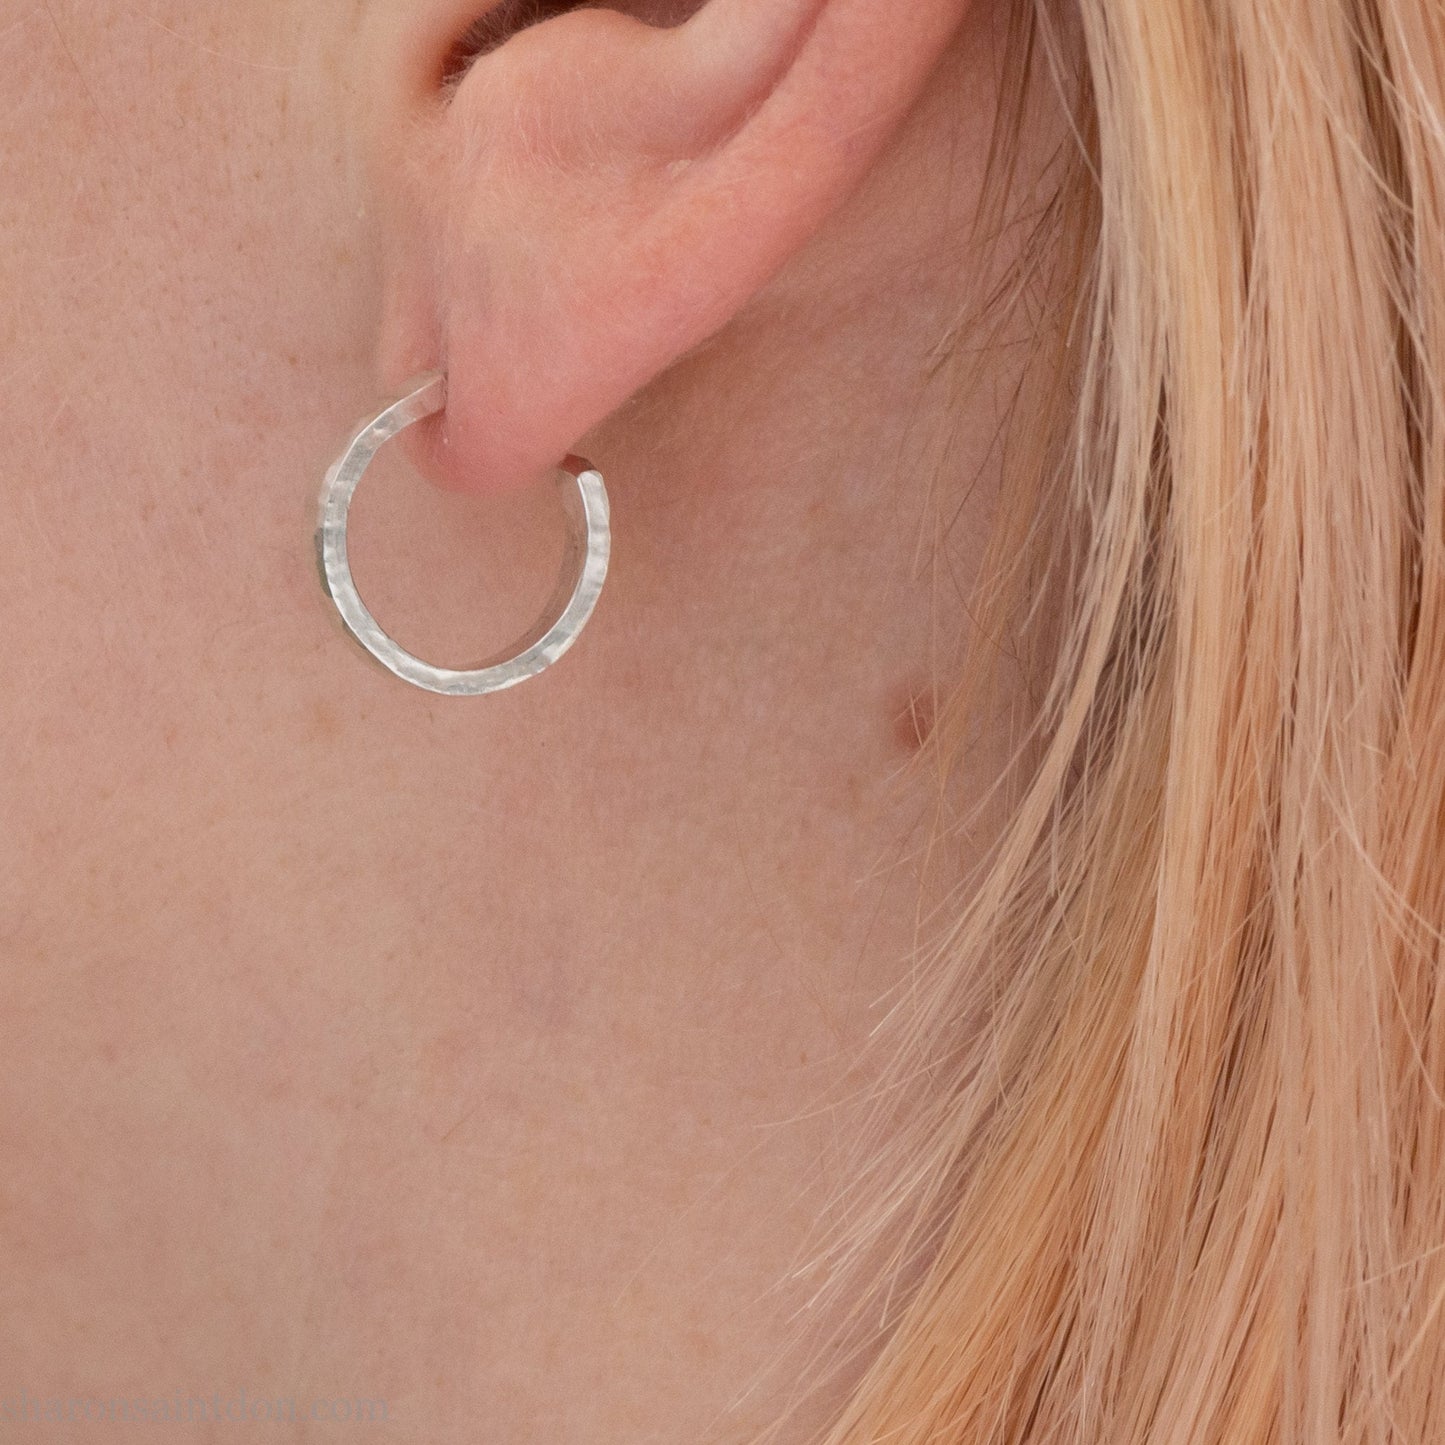 14mm x 3mm small sterling silver hoop earrings. Handmade in North America by Sharon SaintDon. Hammered solid silver with silver posts and backs.